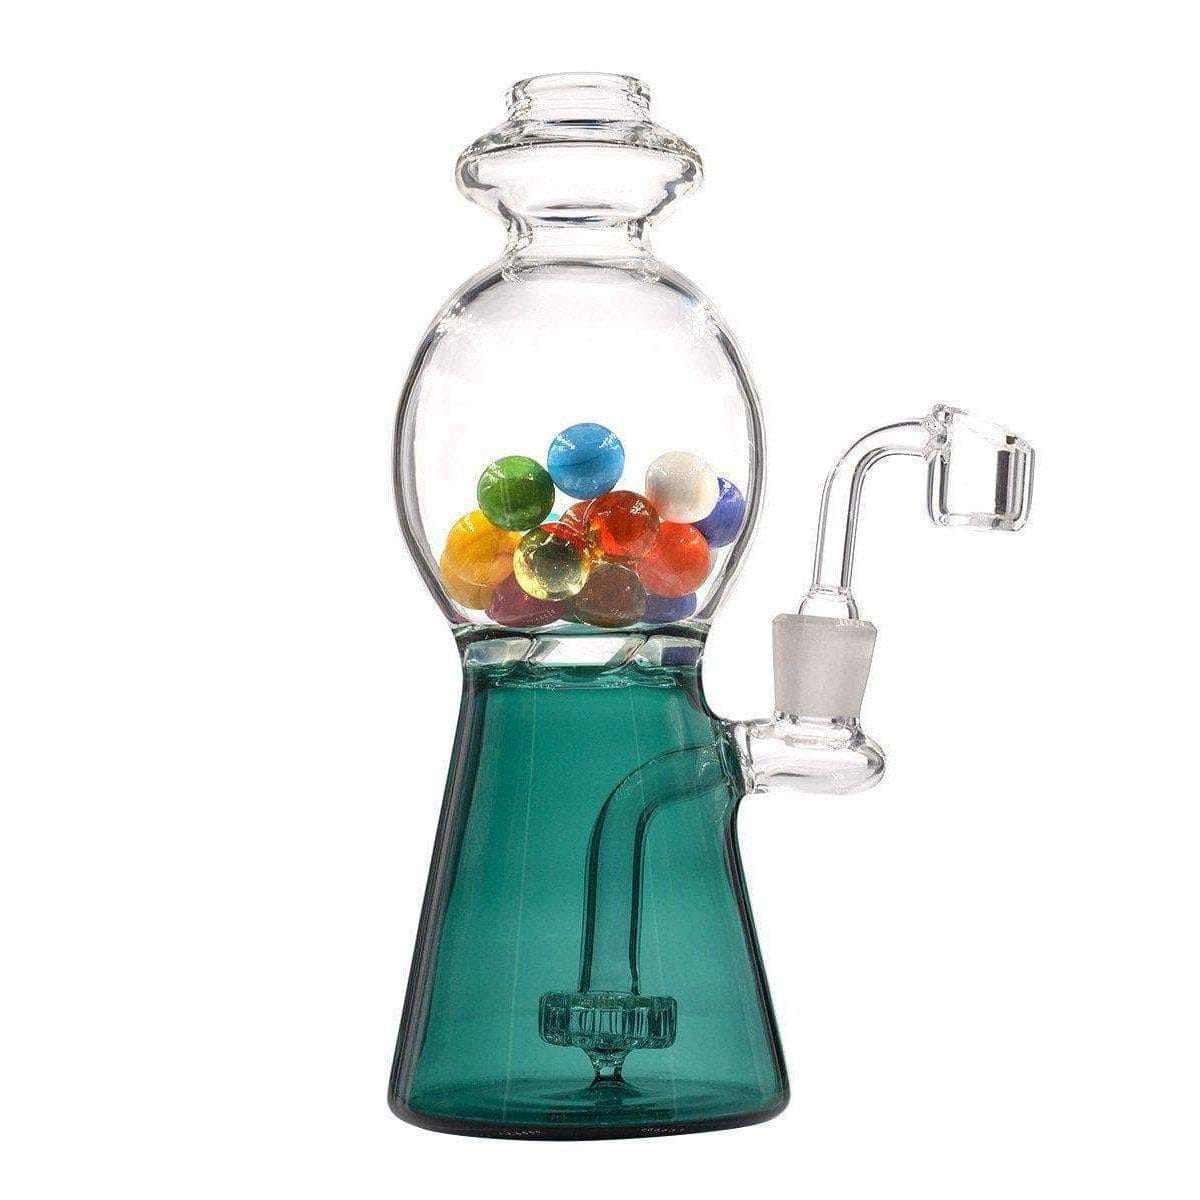 Cute 8-inch glass dab rig smoking device looks like coin-operated candy bubblegum machine